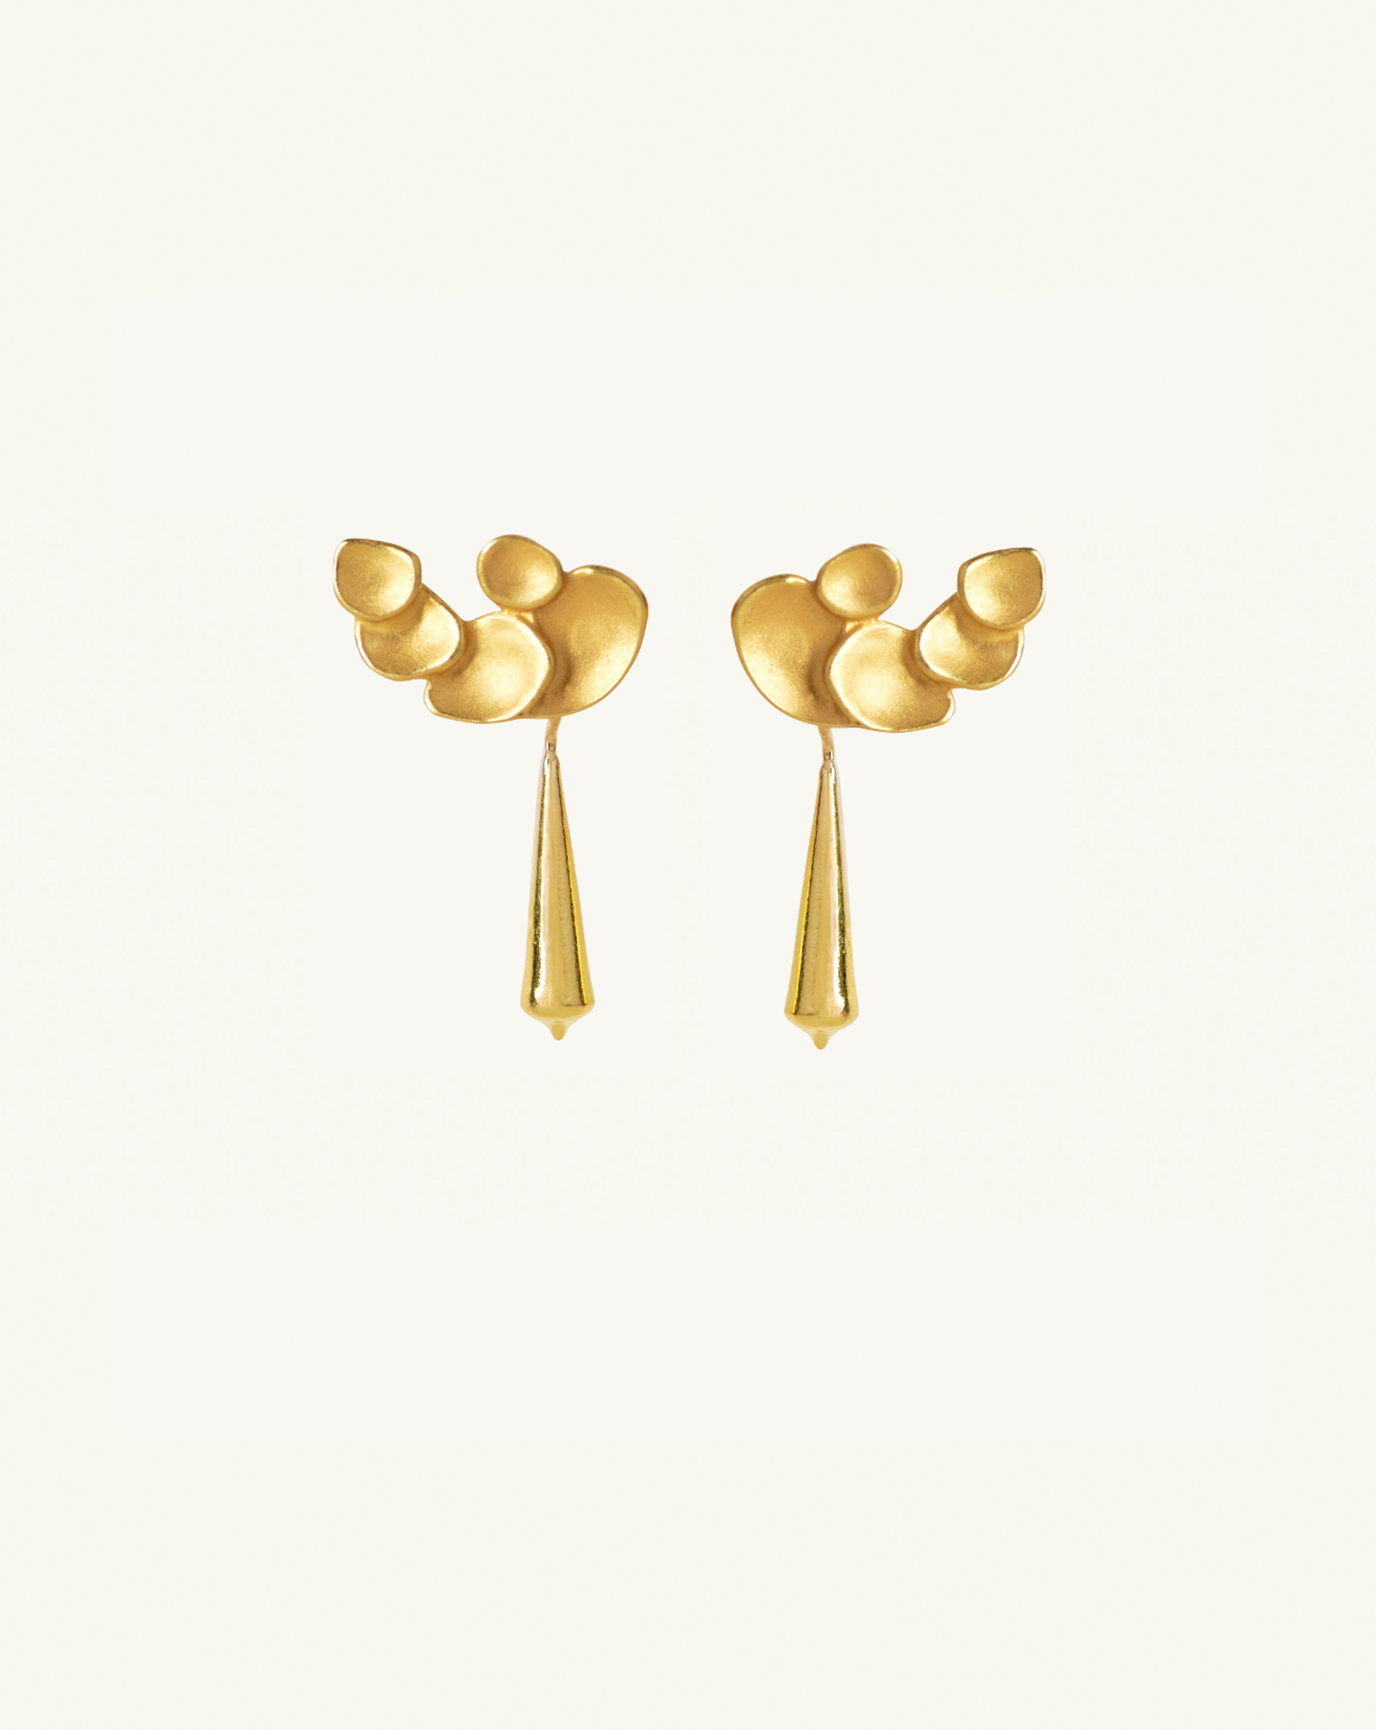 Product image of the tapered gold pod earrings with the large abstract climber studs attached